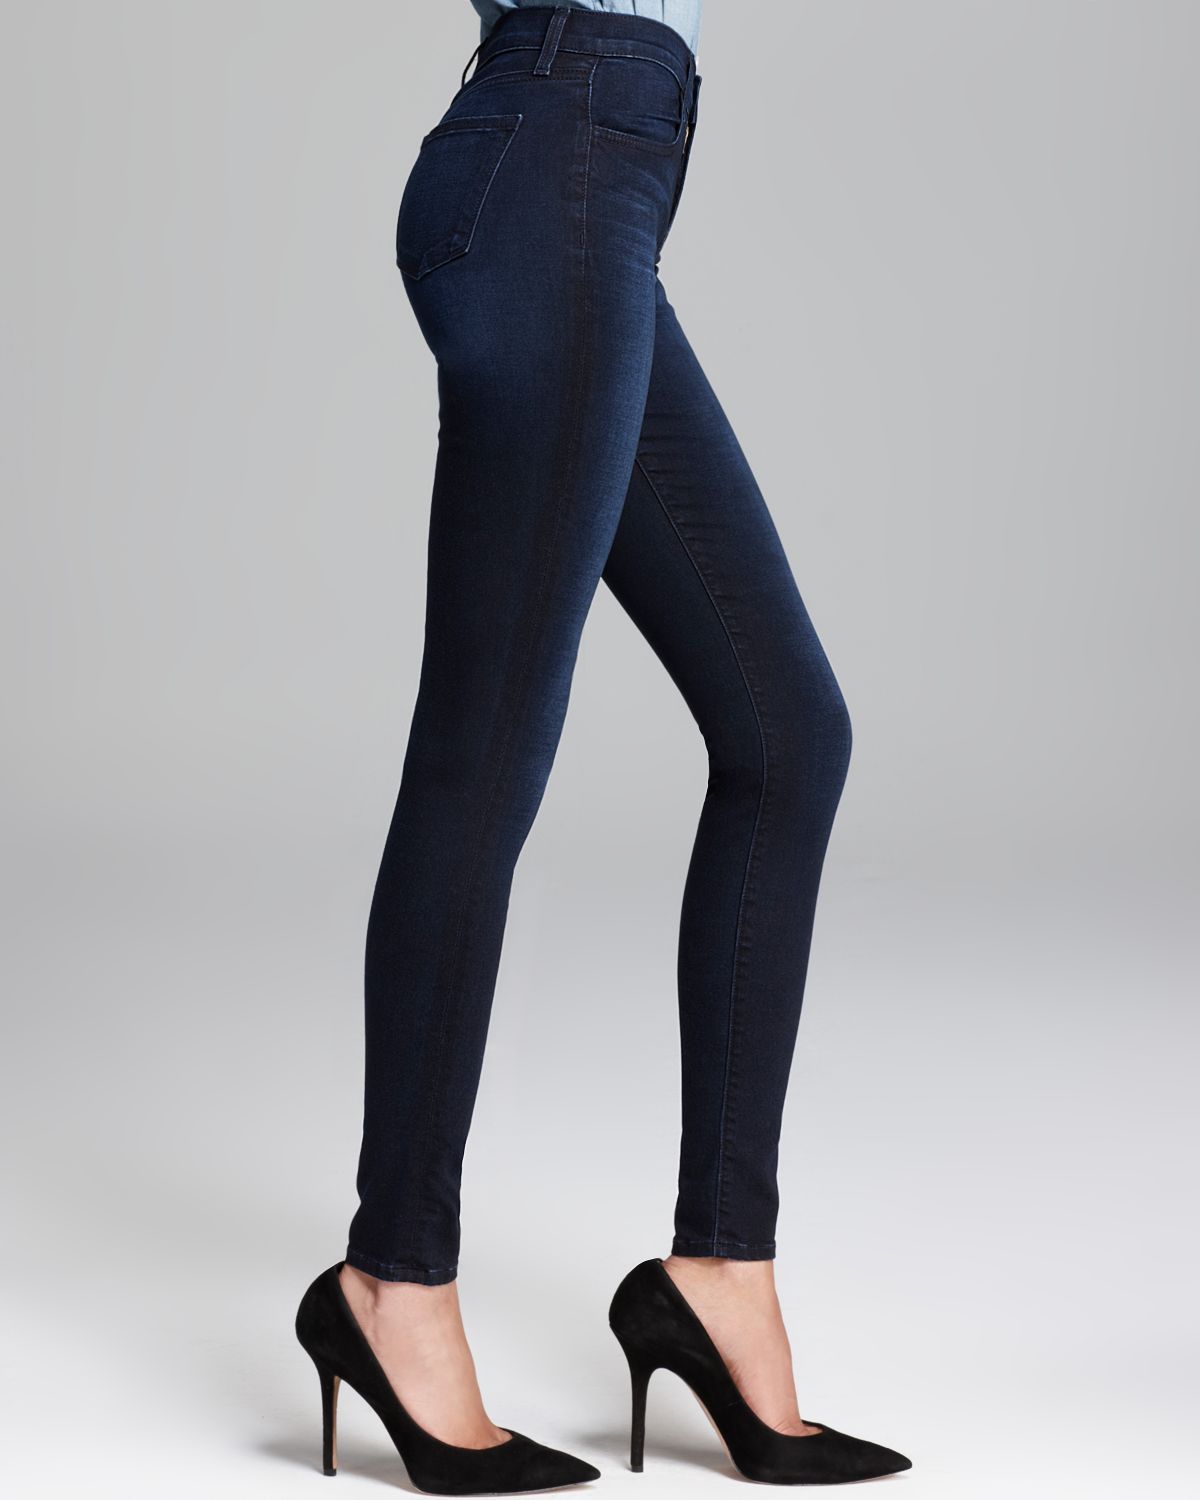 J Brand Jeans Luxe Sateen High Rise Maria Skinny in Atmosphere in Blue -  Lyst